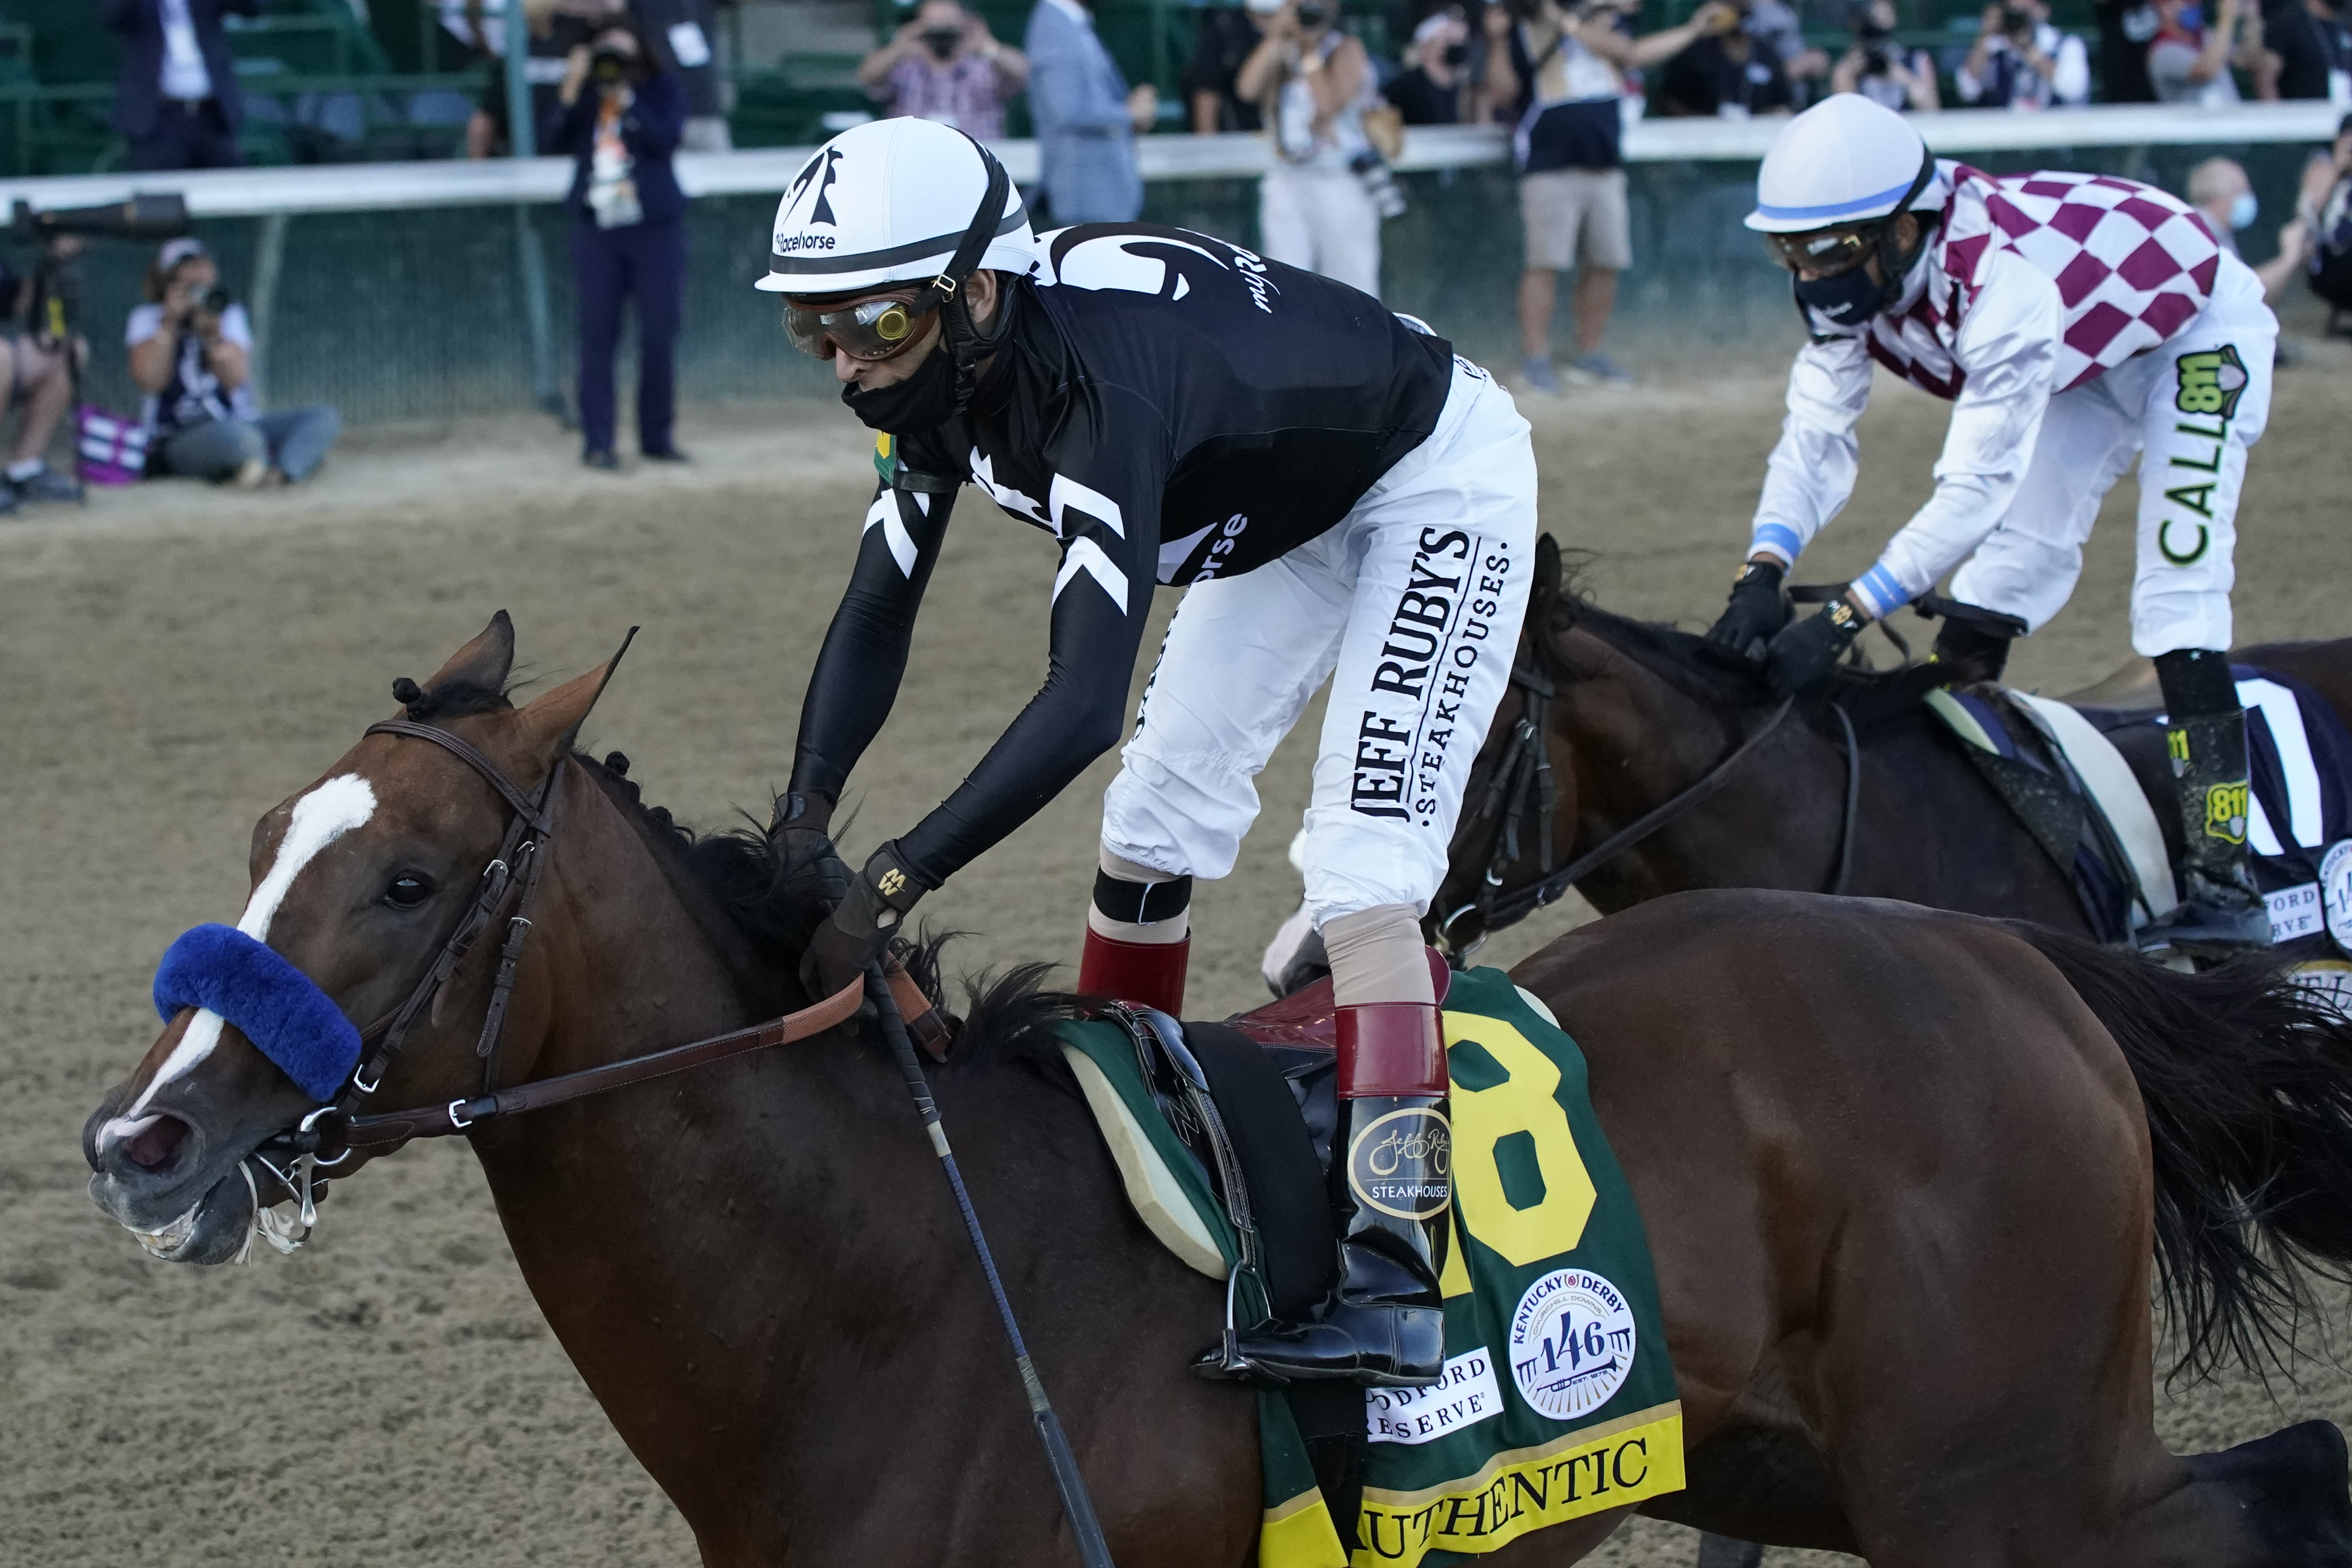 Kentucky Derby winner Authentic voted 2020 Horse of the Year